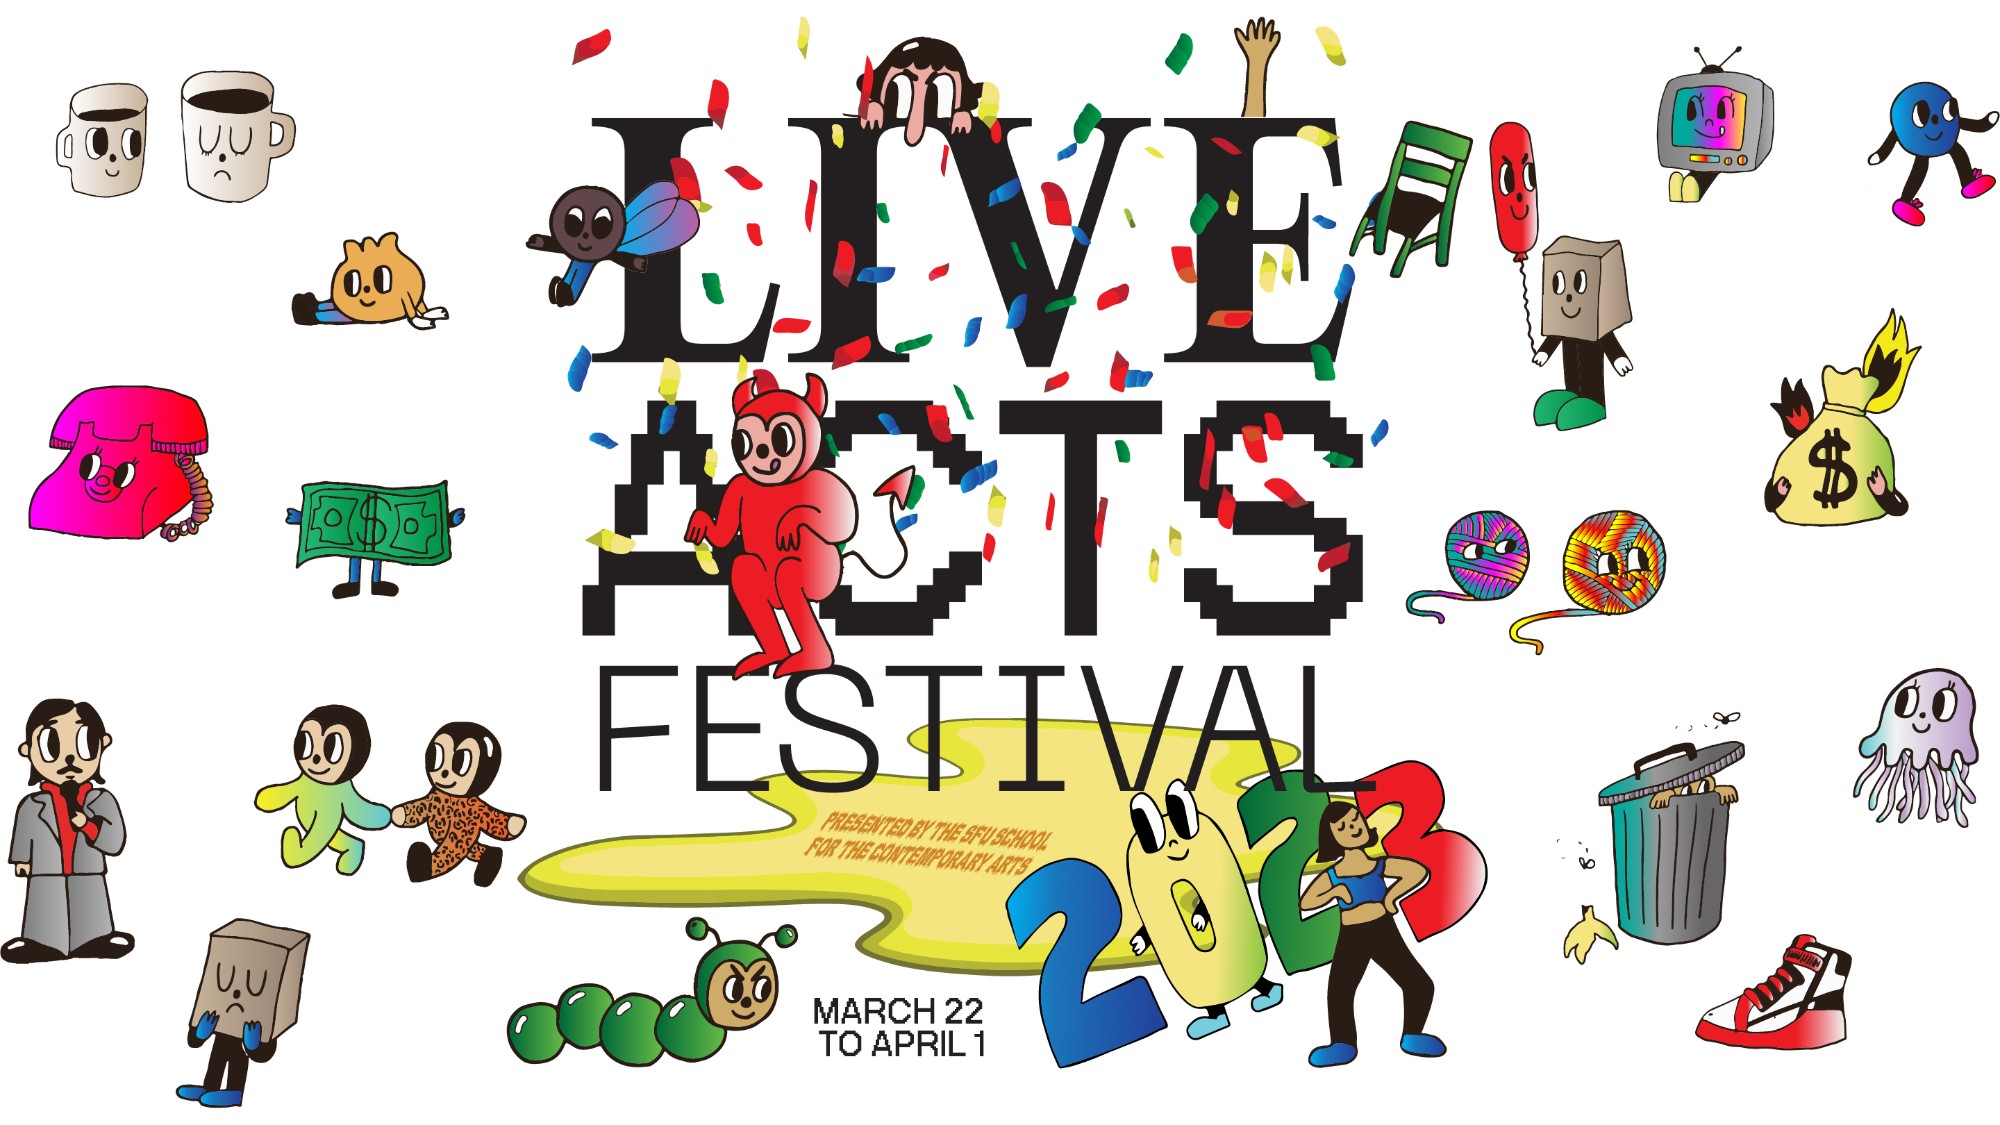 Live Acts Festival